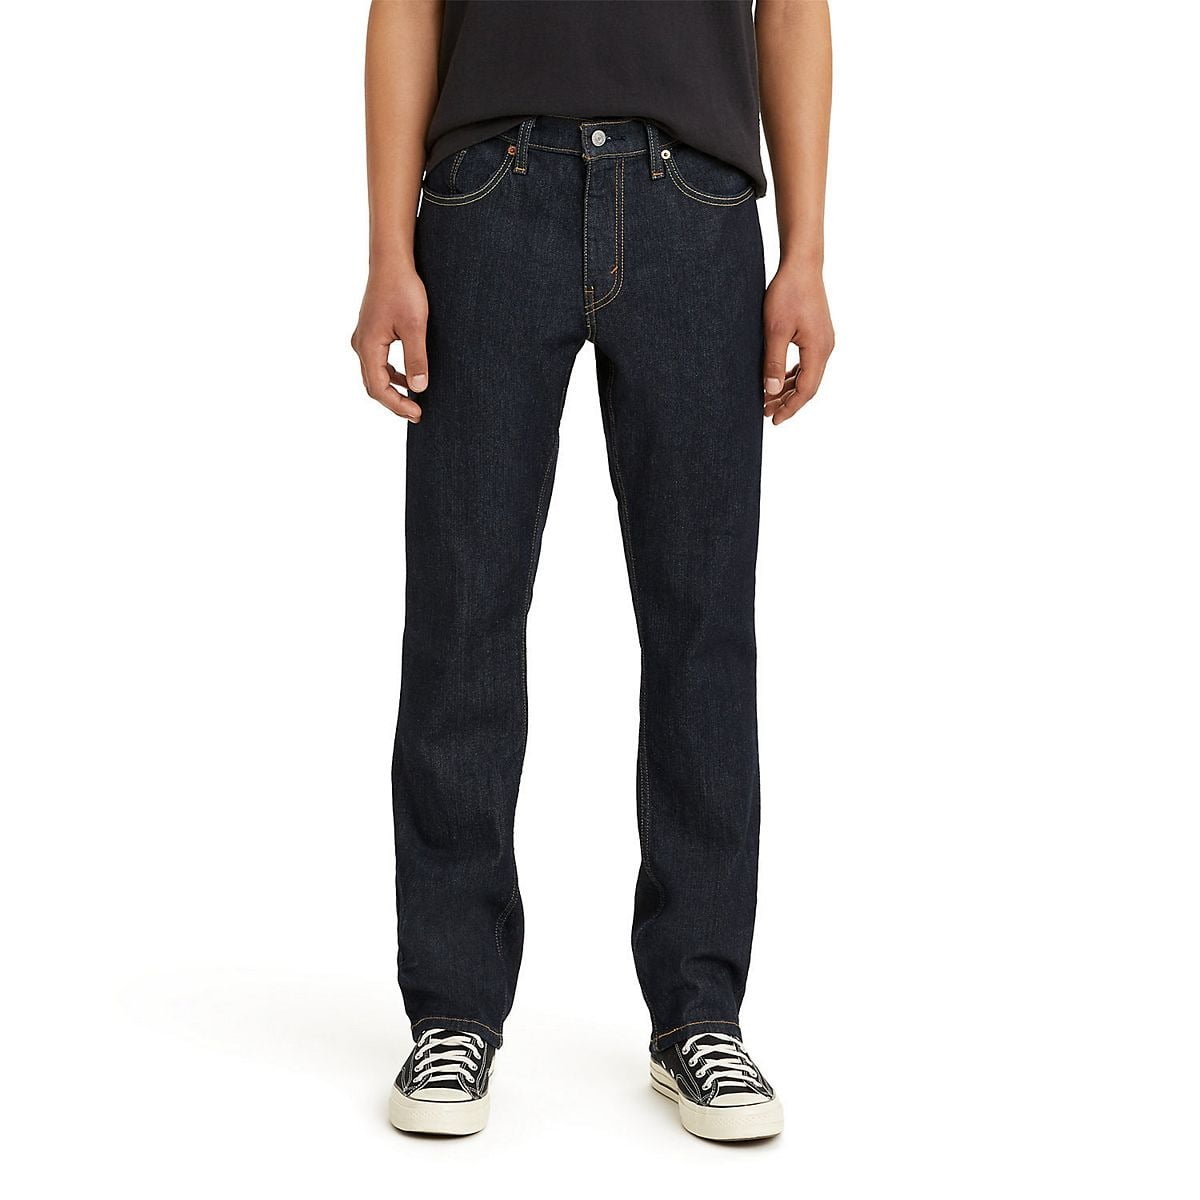 Levi's CLEANER Men's 559 Relaxed Straight Fit Eco Ease Jeans, US 42X32 -  